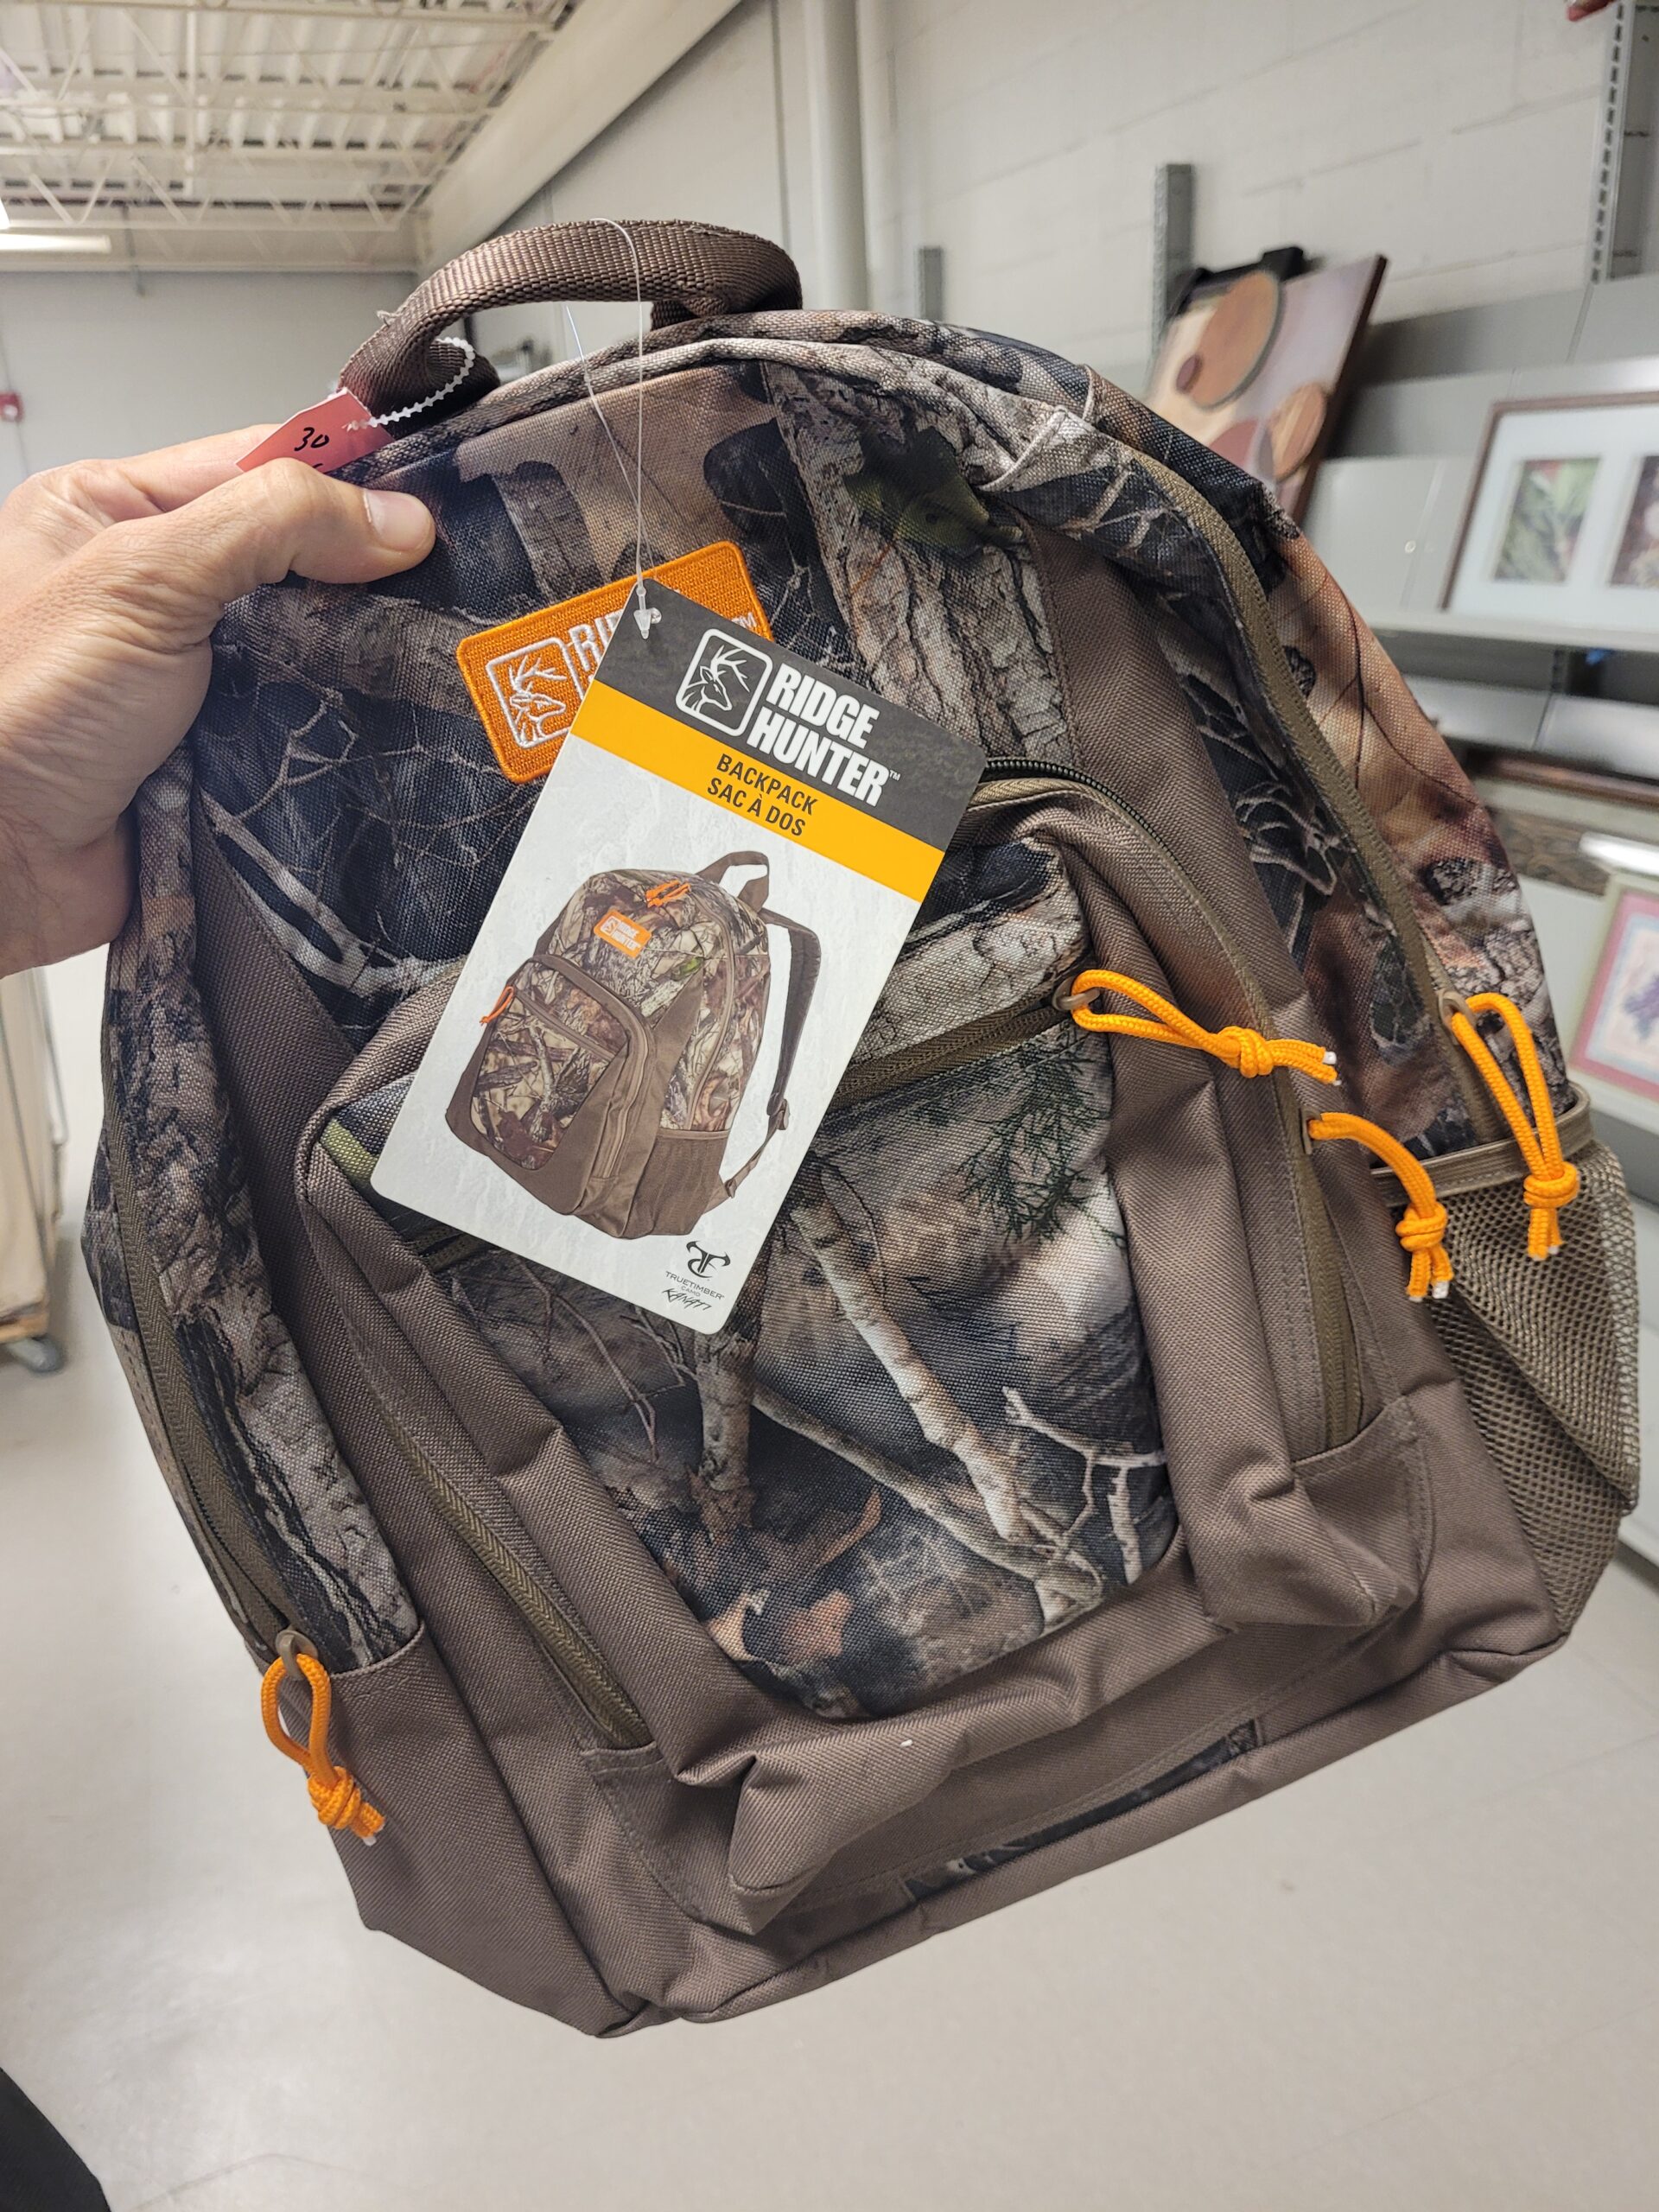 Camo backpack from Goodwill